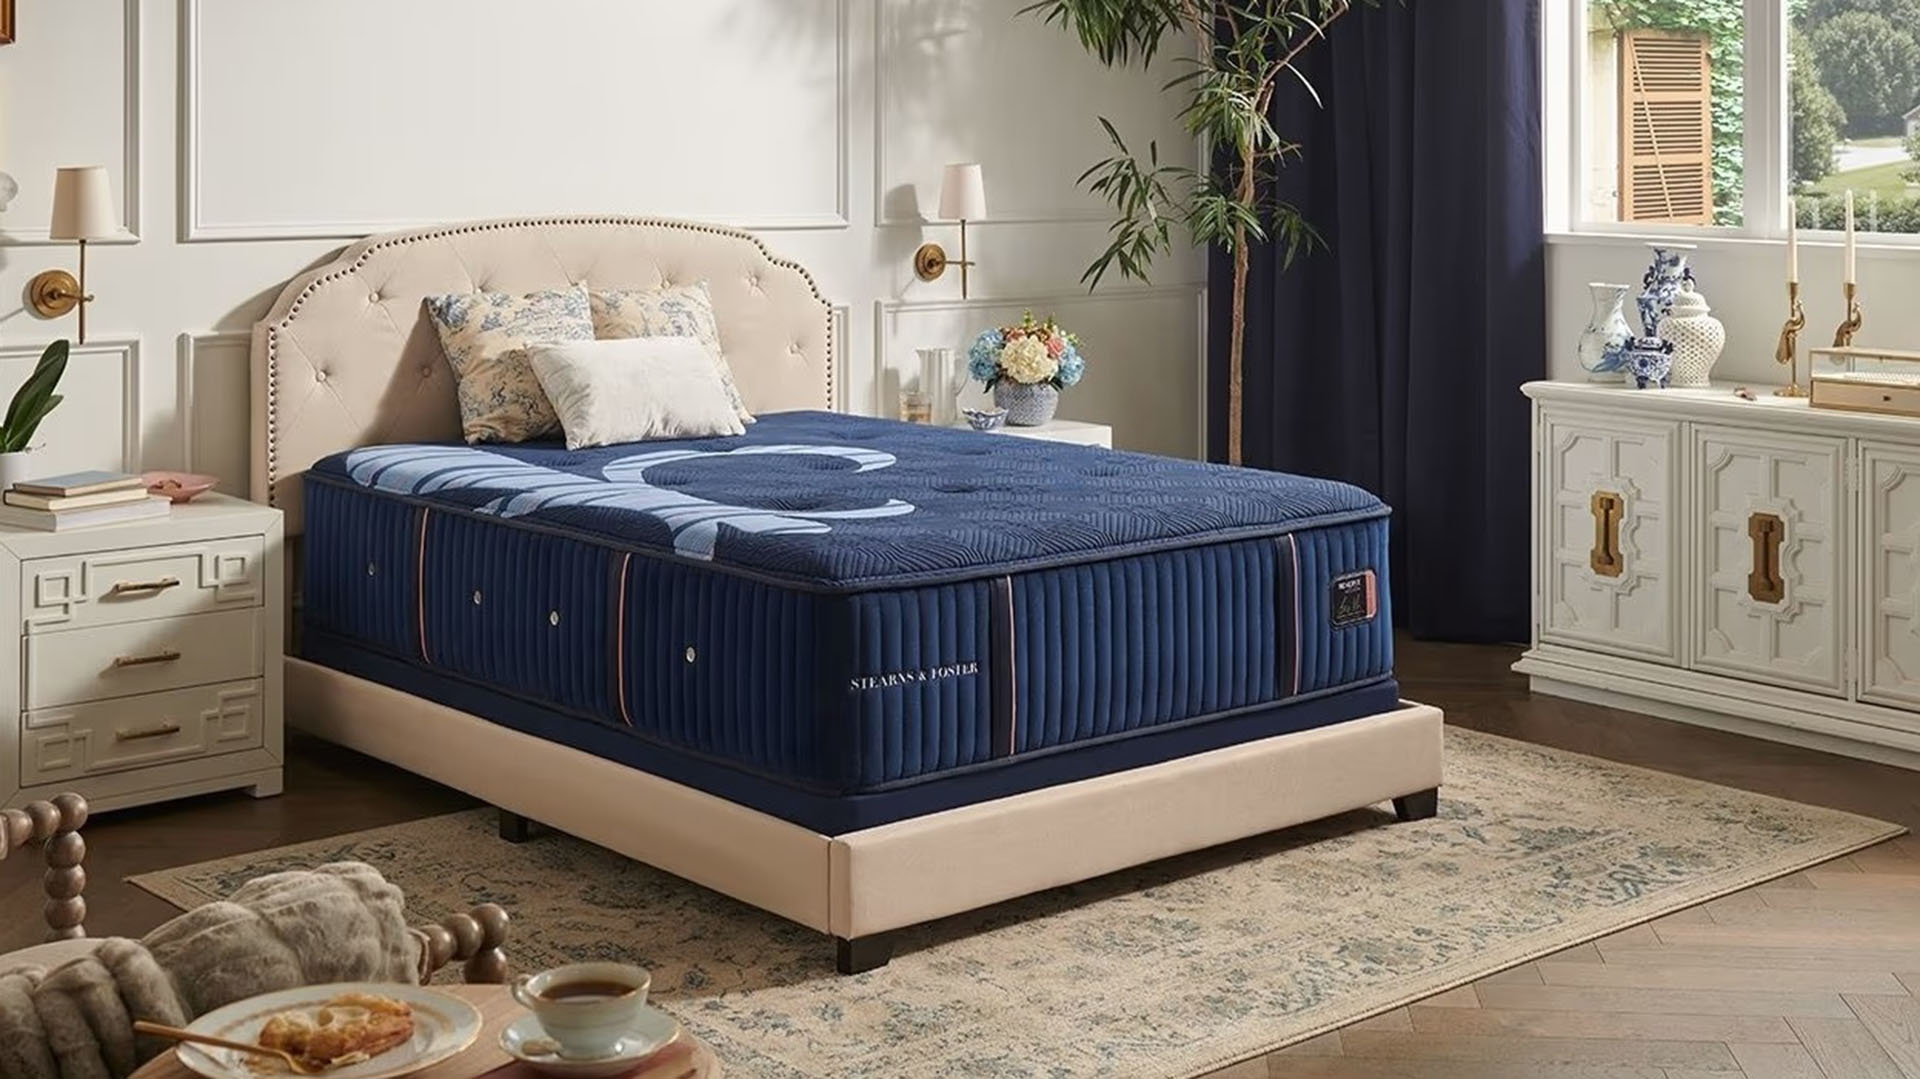 Stearns & Foster mattresses in Delano are designed with comfort and support in mind.